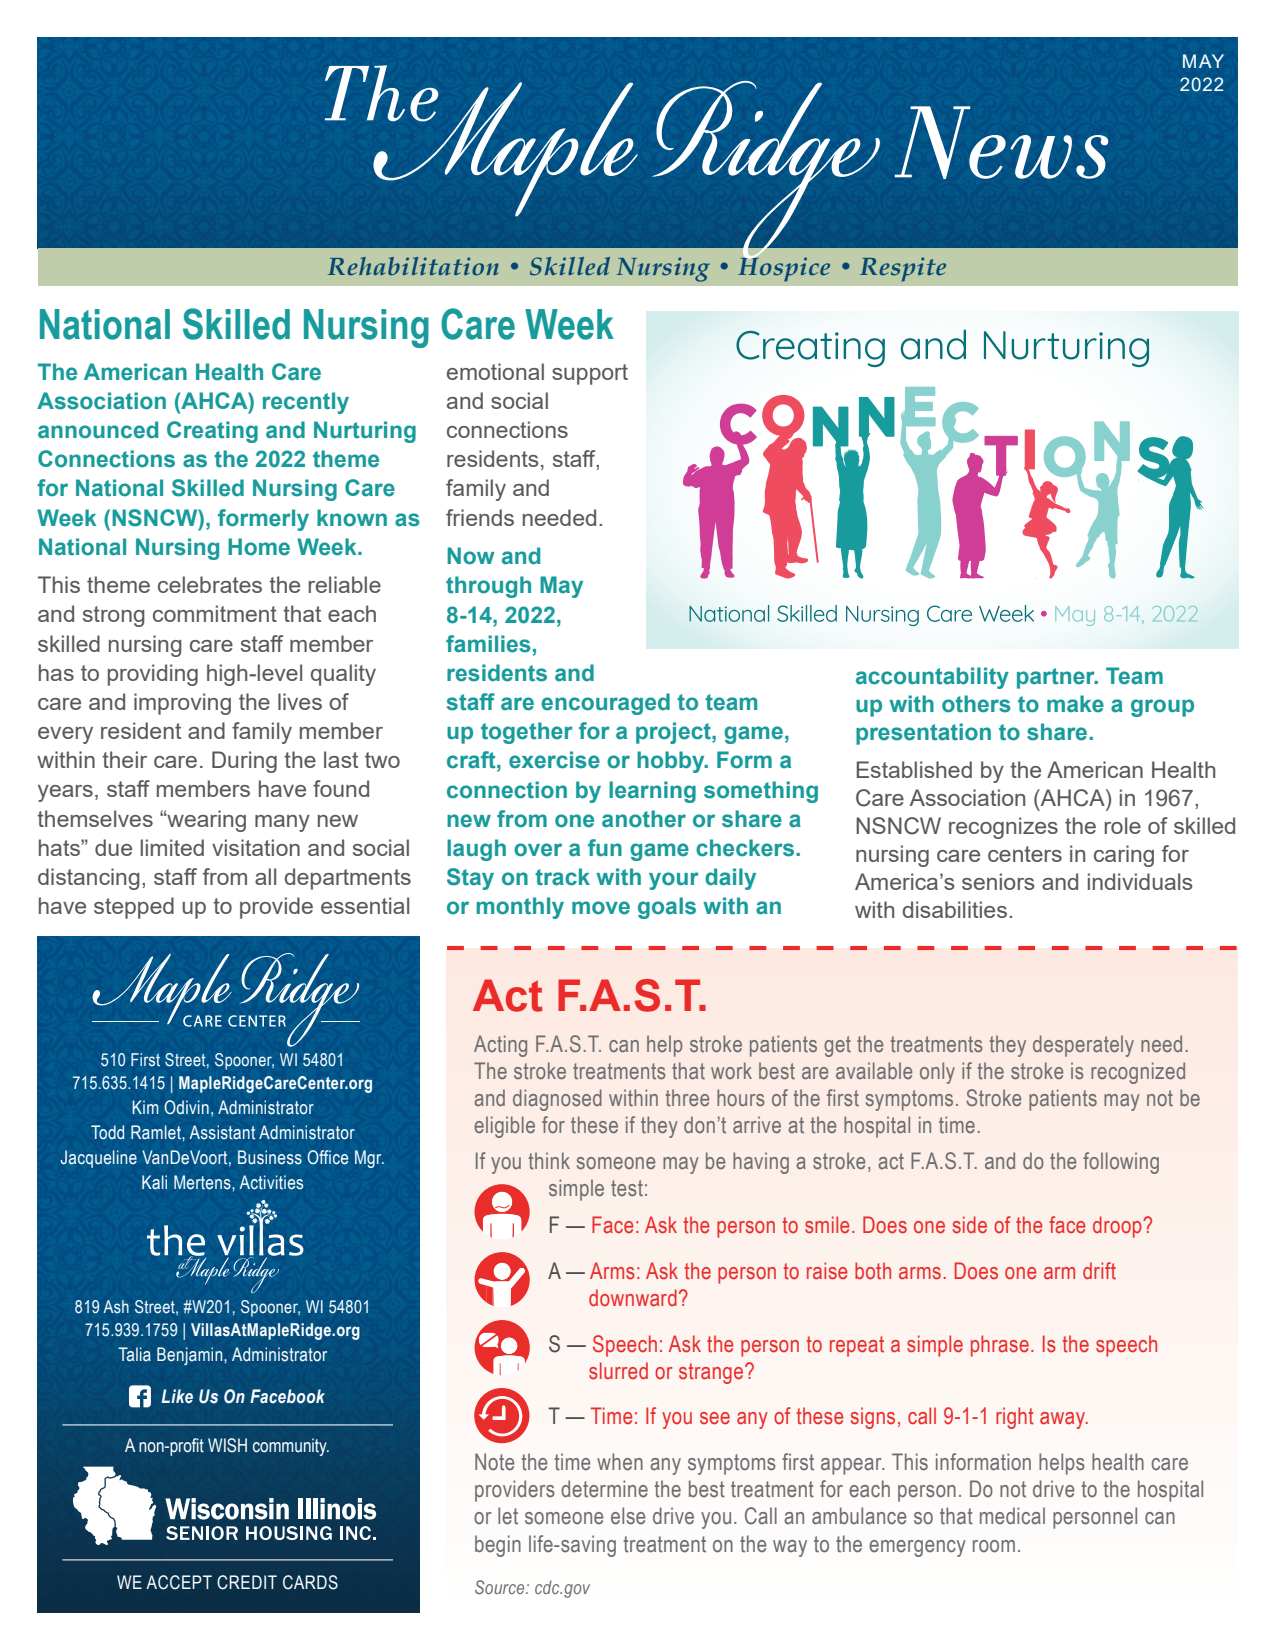 May 2022 Newsletter at Maple Ridge Care Center in Spooner, Wisconsin